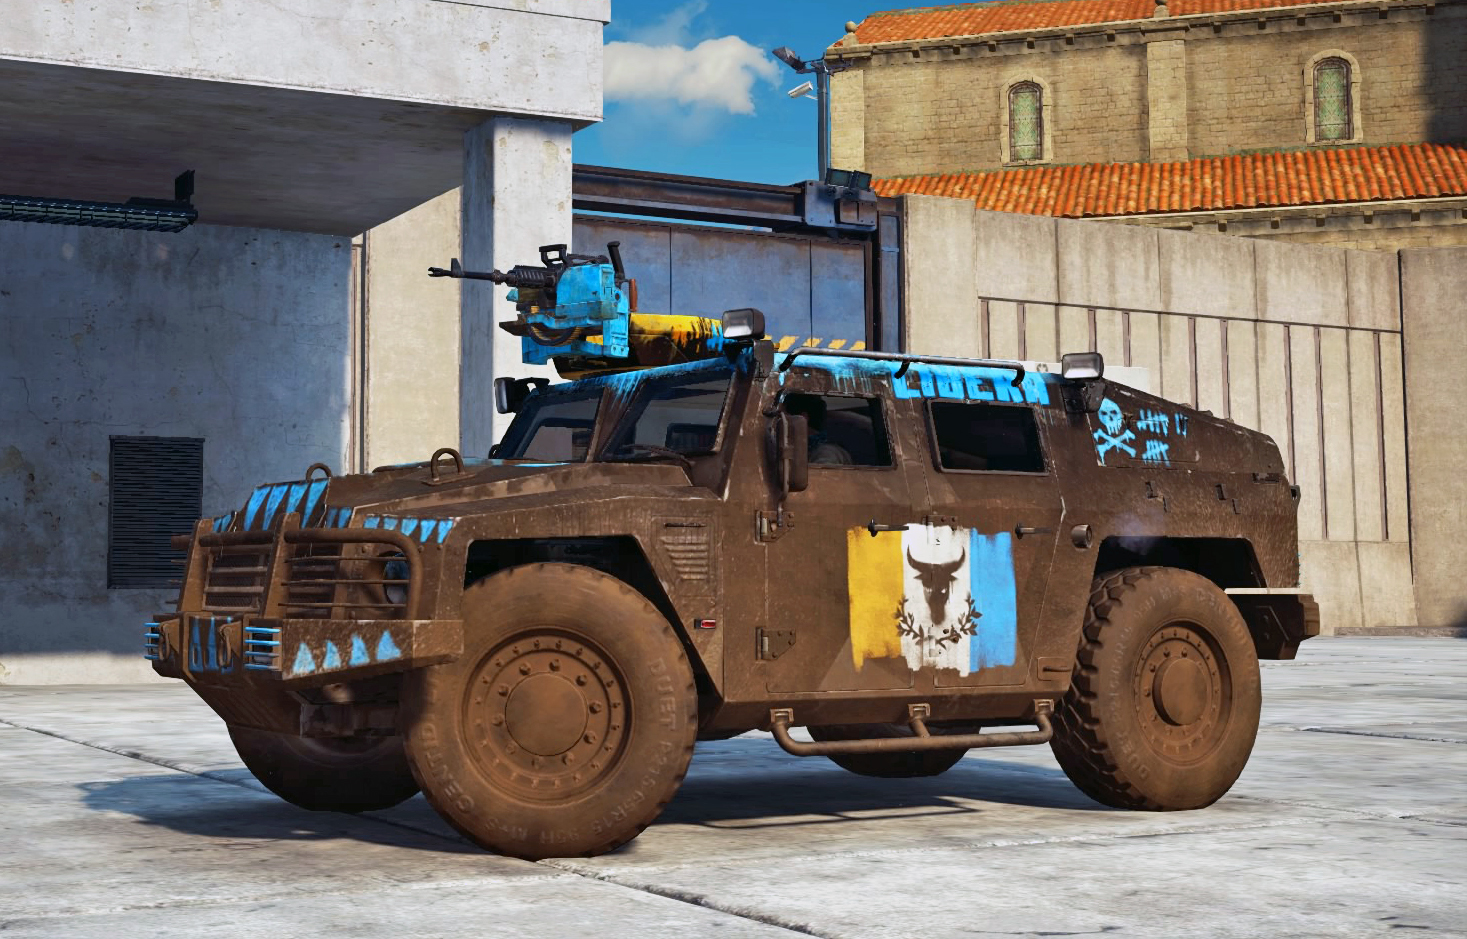 just cause 3 vehicles locations